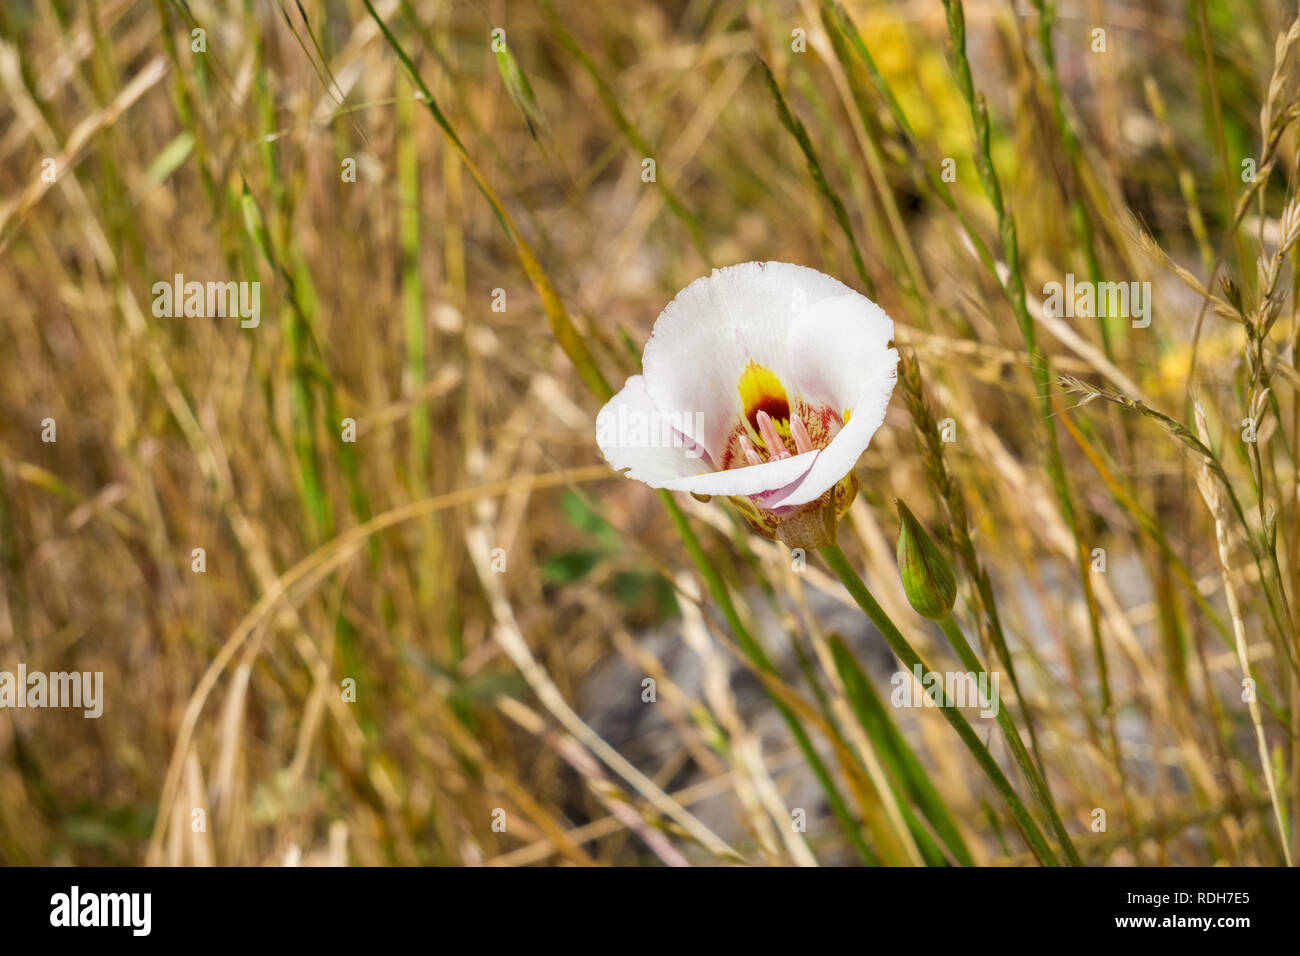 Leichtlin's Mariposa Lilly blooming in tall grass, California Stock Photo